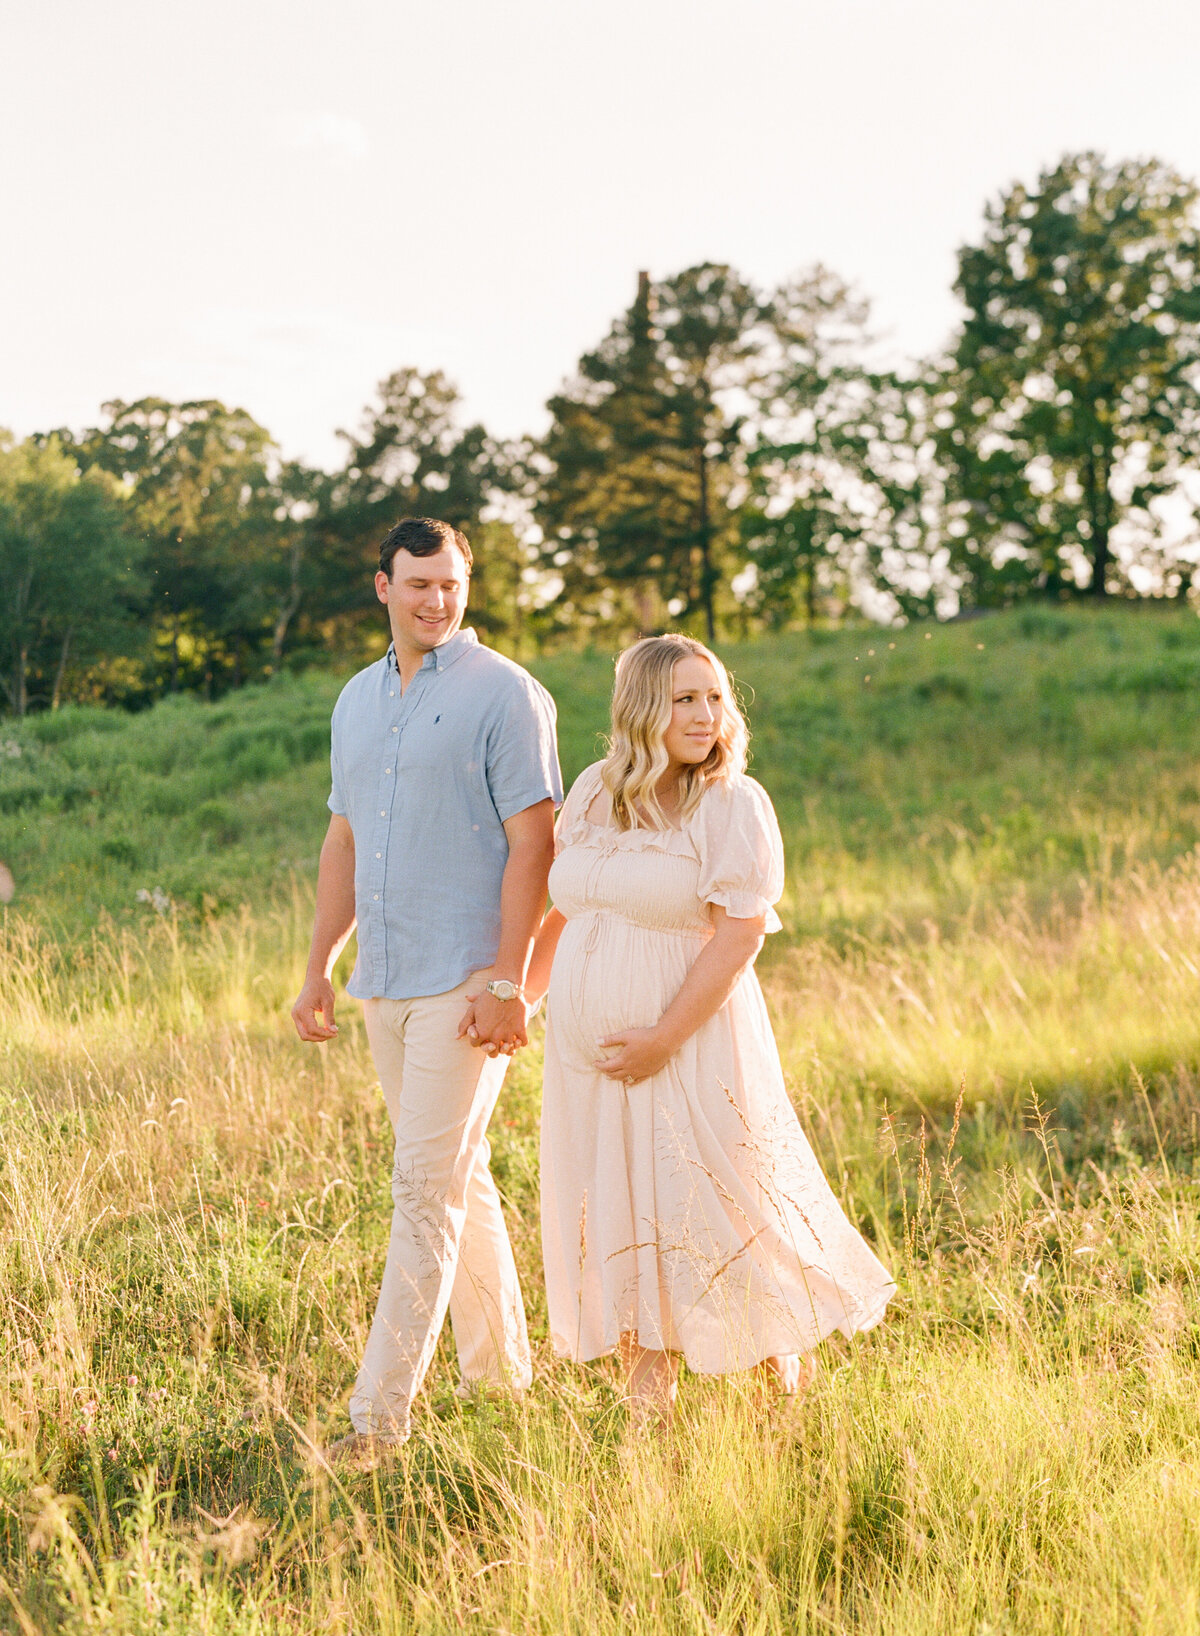 Couple walks in a field during their maternity session at the Art Museum in Raleigh NC. Photographed by Raleigh Maternity Photographer A.J. Dunlap Photography.